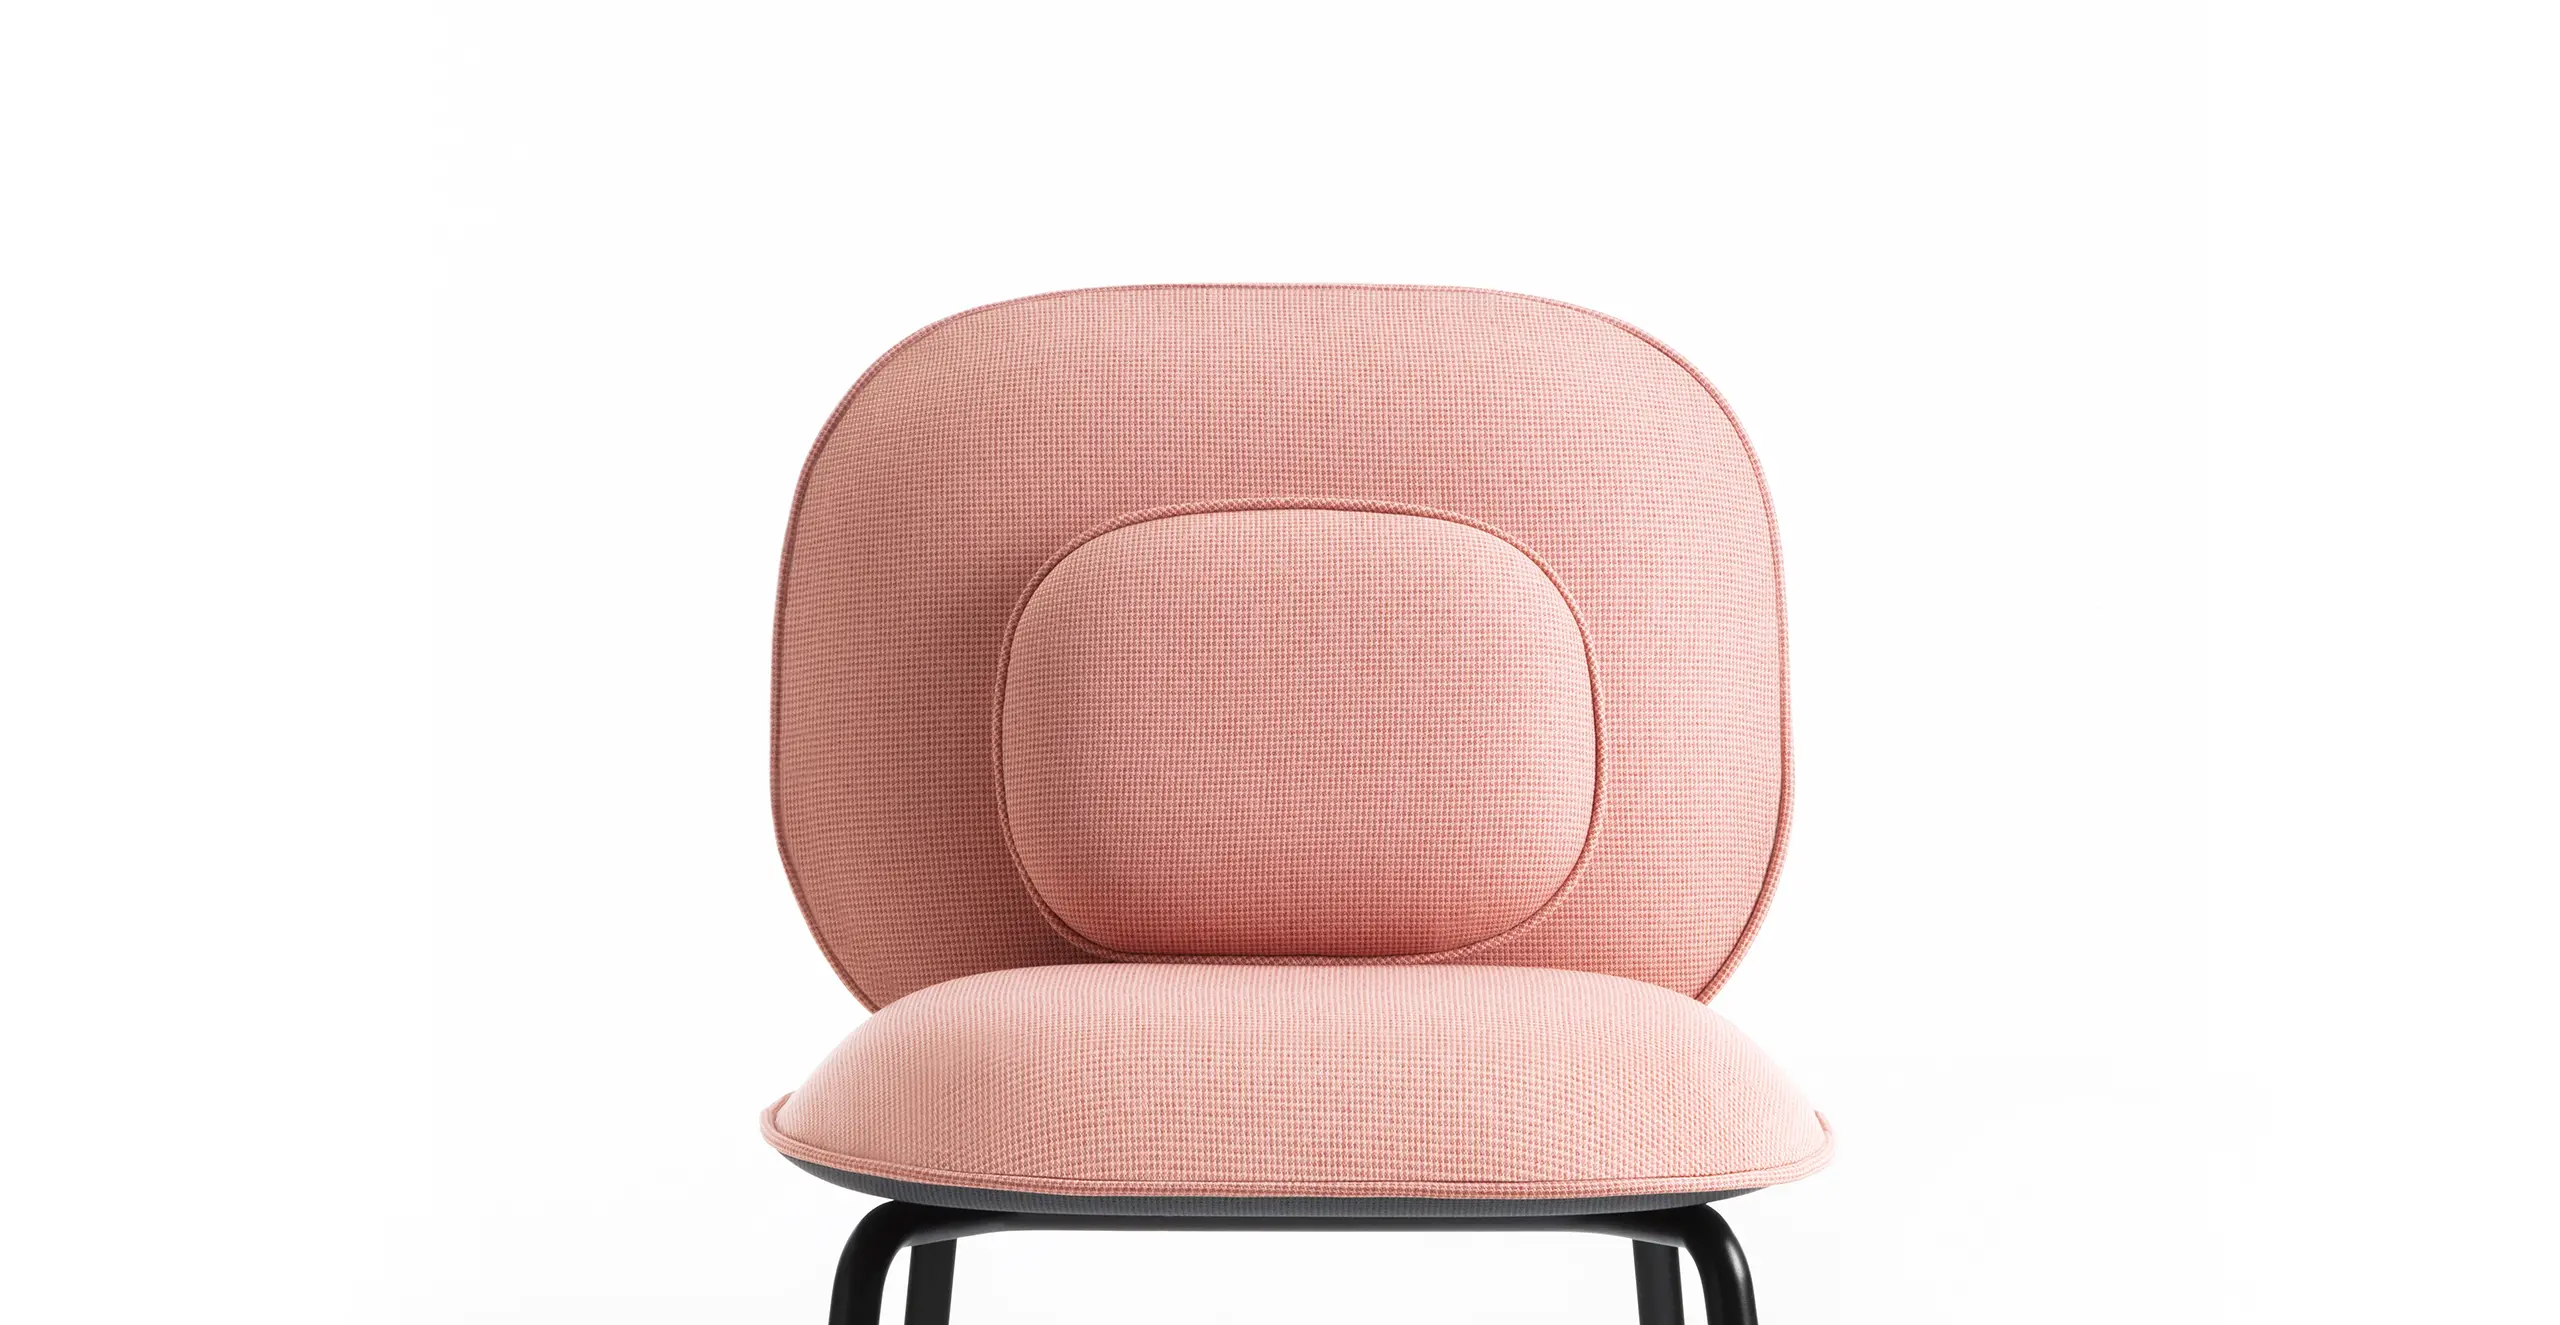 Tasca Lounge Chair by TOOU design